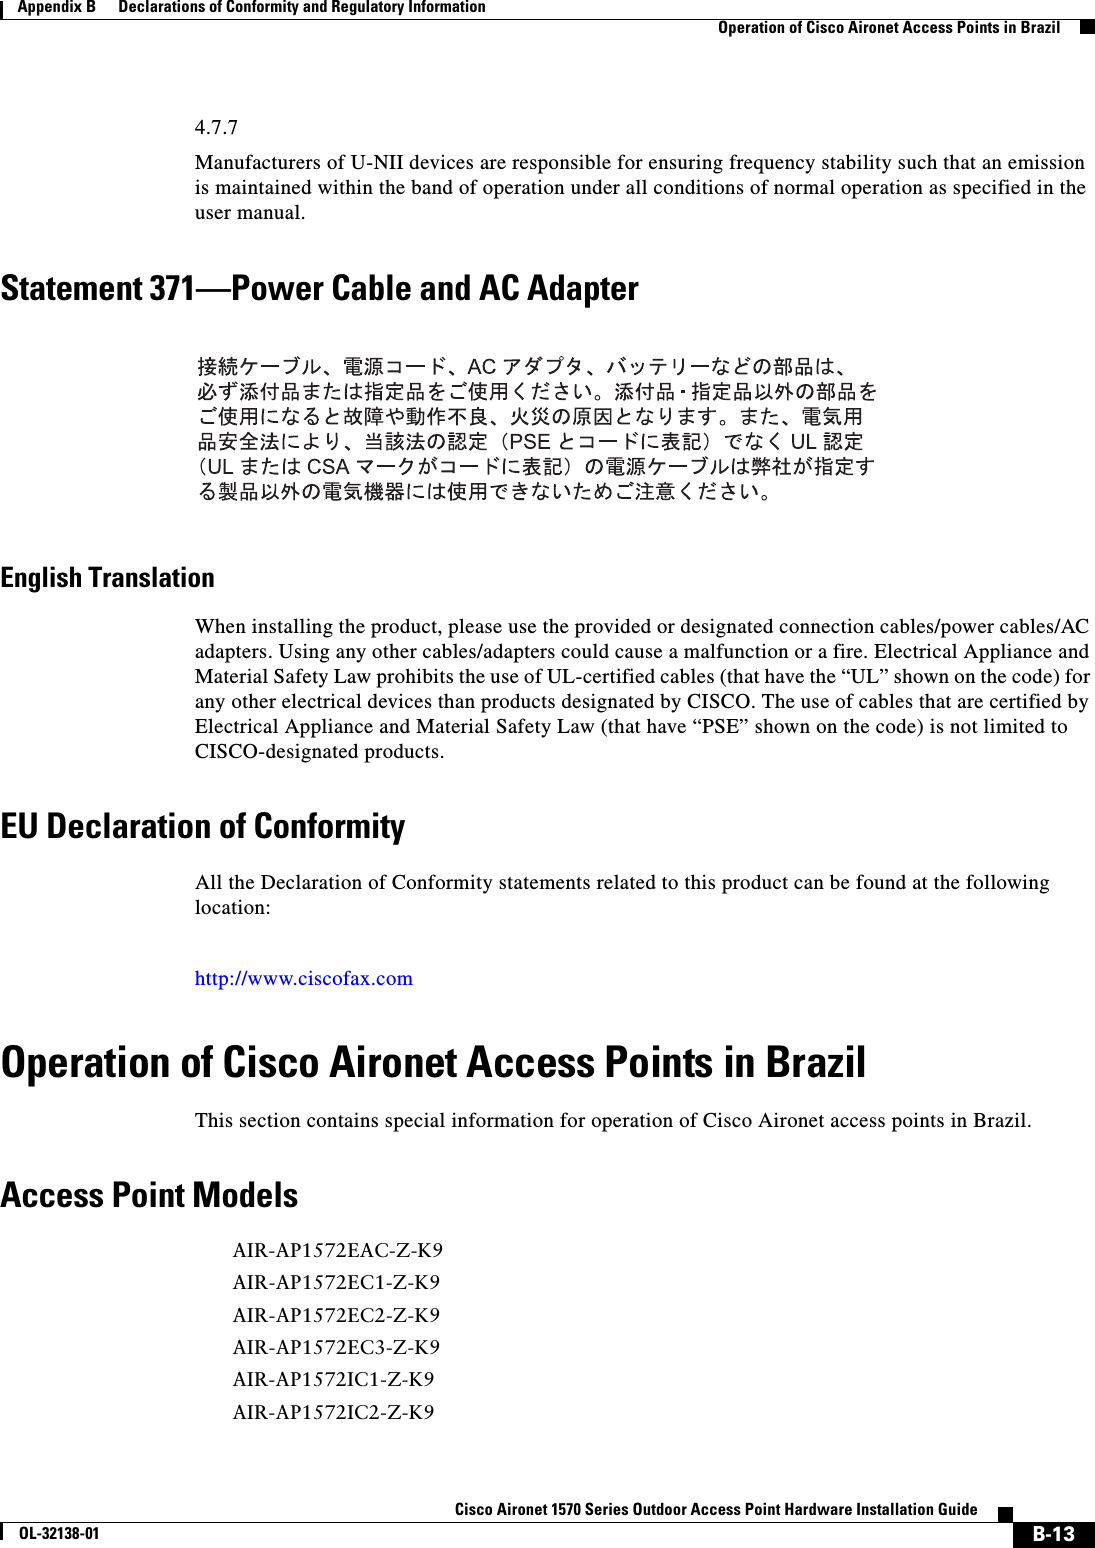  B-13Cisco Aironet 1570 Series Outdoor Access Point Hardware Installation GuideOL-32138-01Appendix B      Declarations of Conformity and Regulatory InformationOperation of Cisco Aironet Access Points in Brazil4.7.7Manufacturers of U-NII devices are responsible for ensuring frequency stability such that an emission is maintained within the band of operation under all conditions of normal operation as specified in the user manual.Statement 371—Power Cable and AC AdapterEnglish TranslationWhen installing the product, please use the provided or designated connection cables/power cables/AC adapters. Using any other cables/adapters could cause a malfunction or a fire. Electrical Appliance and Material Safety Law prohibits the use of UL-certified cables (that have the “UL” shown on the code) for any other electrical devices than products designated by CISCO. The use of cables that are certified by Electrical Appliance and Material Safety Law (that have “PSE” shown on the code) is not limited to CISCO-designated products.EU Declaration of ConformityAll the Declaration of Conformity statements related to this product can be found at the following location:http://www.ciscofax.comOperation of Cisco Aironet Access Points in BrazilThis section contains special information for operation of Cisco Aironet access points in Brazil.Access Point ModelsAIR-AP1572EAC-Z-K9AIR-AP1572EC1-Z-K9AIR-AP1572EC2-Z-K9AIR-AP1572EC3-Z-K9AIR-AP1572IC1-Z-K9AIR-AP1572IC2-Z-K9